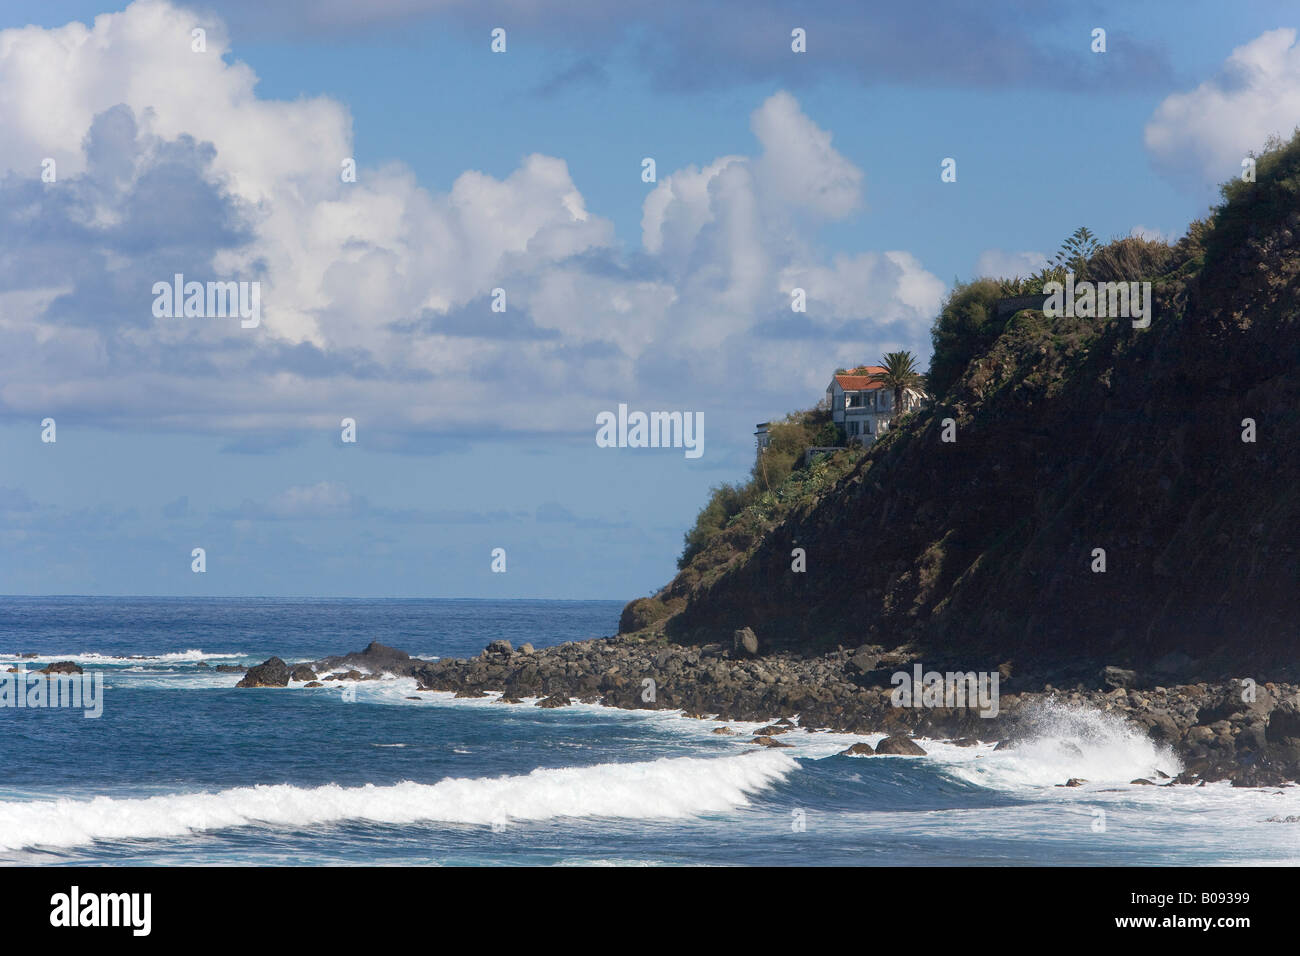 Playa del Socorro beach and rocky outcrop on the north side of Tenerife, Canary Islands, Spain Stock Photo